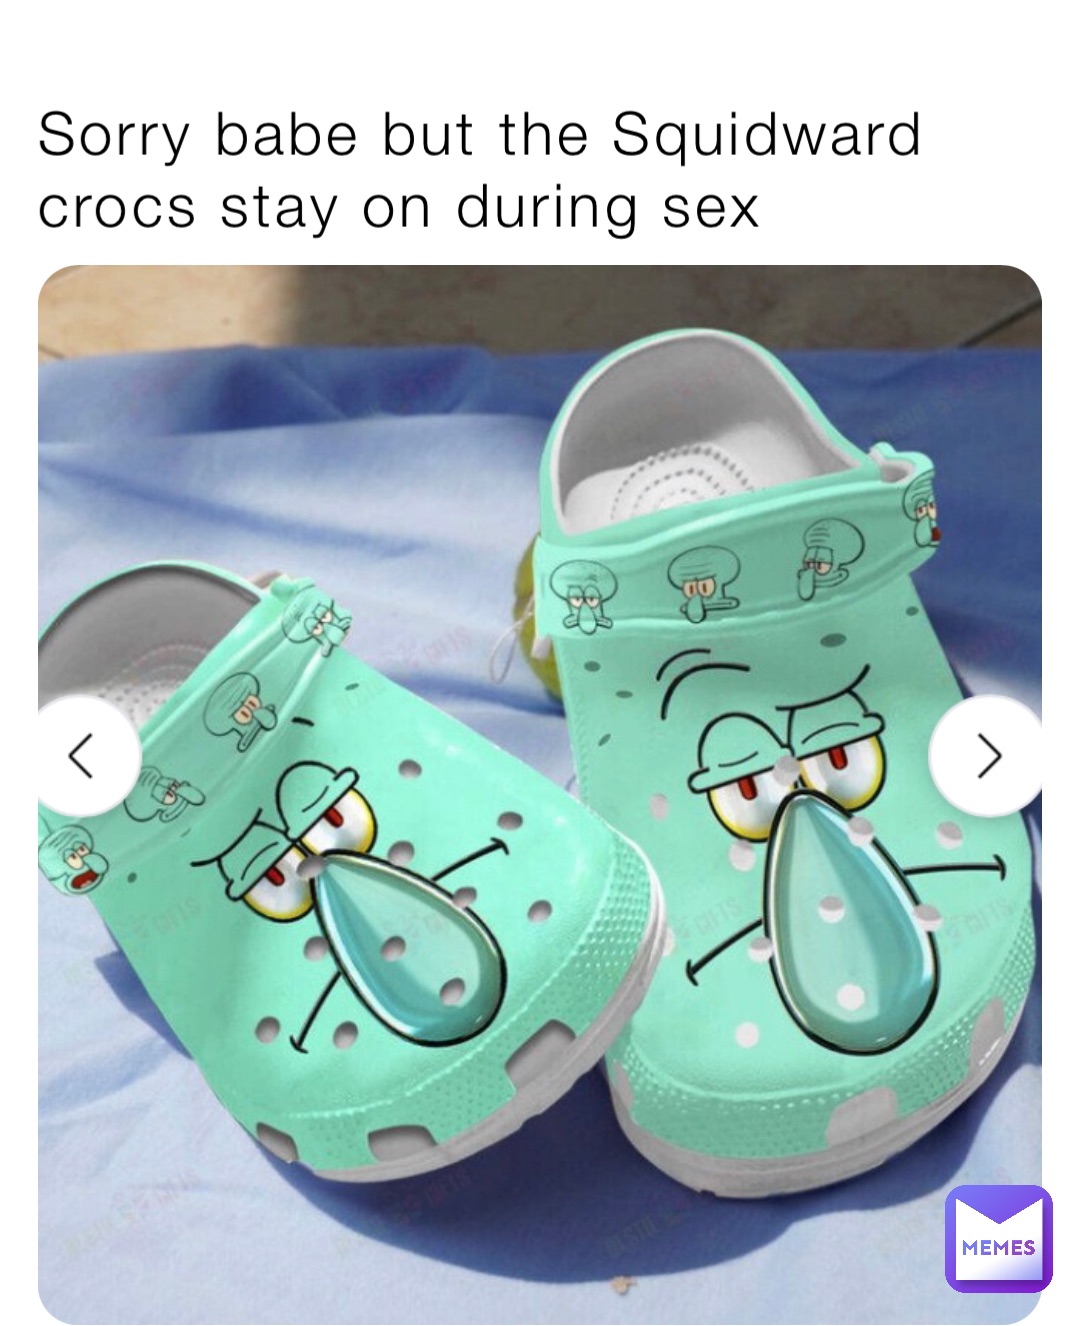 Sorry babe but the Squidward crocs stay on during sex